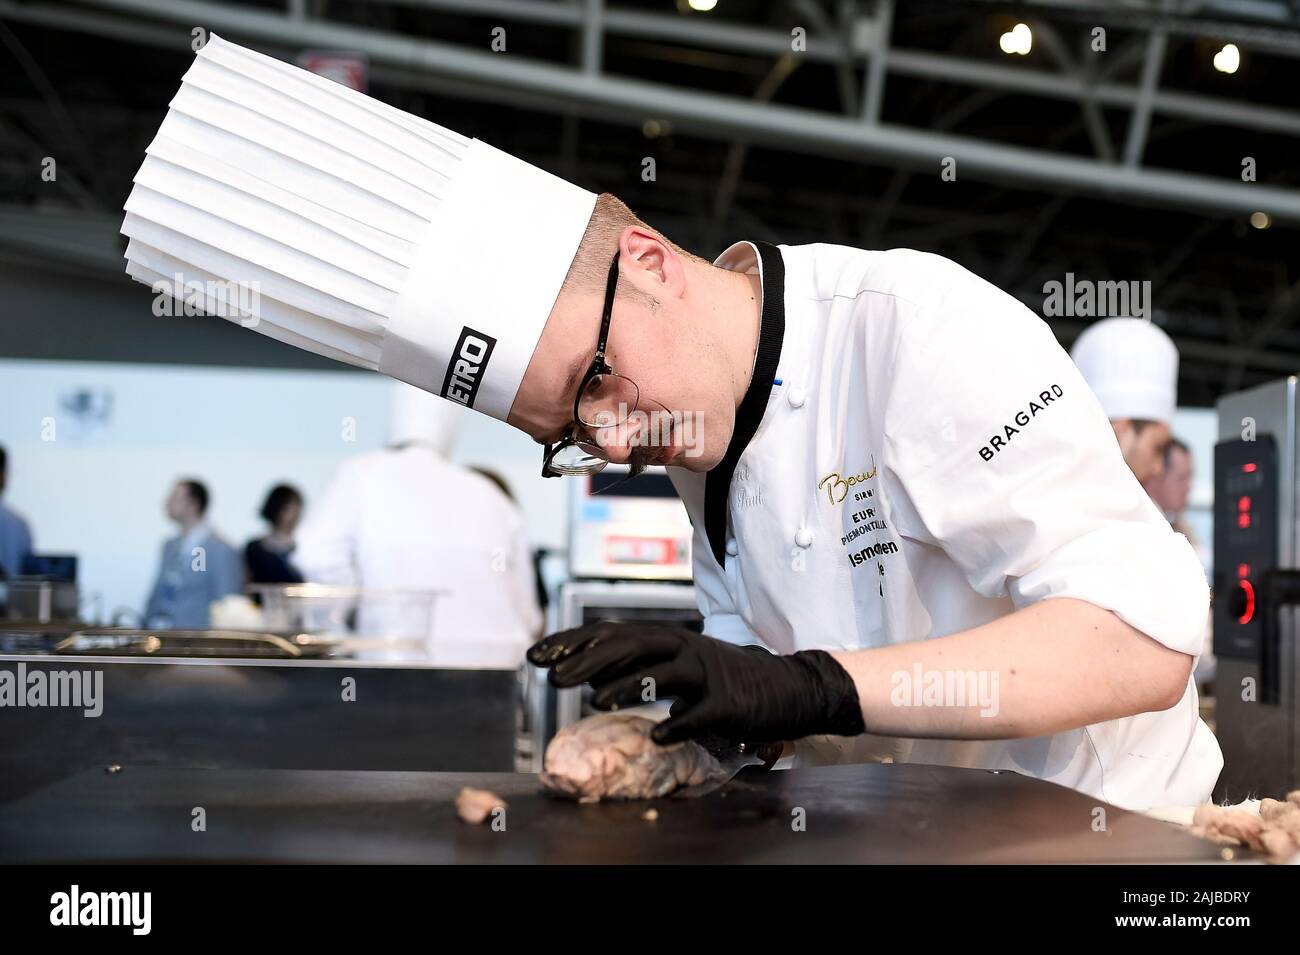 Turin, Italy - 12 June, 2018: Ismo Sipelainen of Finland cooks during the Europe 2018 Bocuse d'Or International culinary competition. Best ten teams will access to the world final in Lyon in 2019. Credit: Nicolò Campo/Alamy Live News Stock Photo